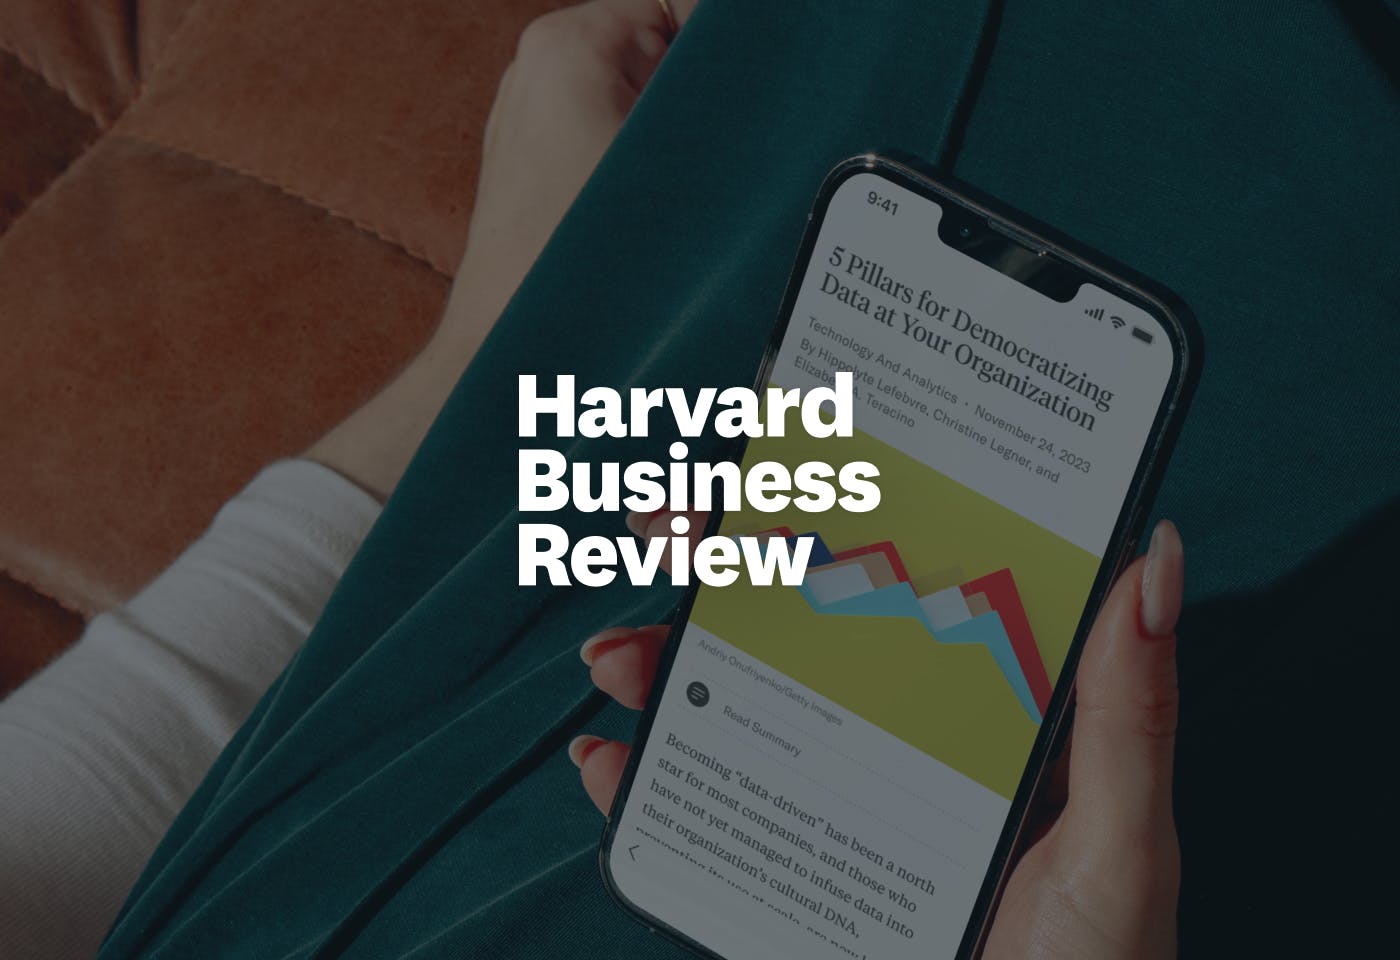 HBR logo in front of an image of a person holding a phone with the HBR mobile app